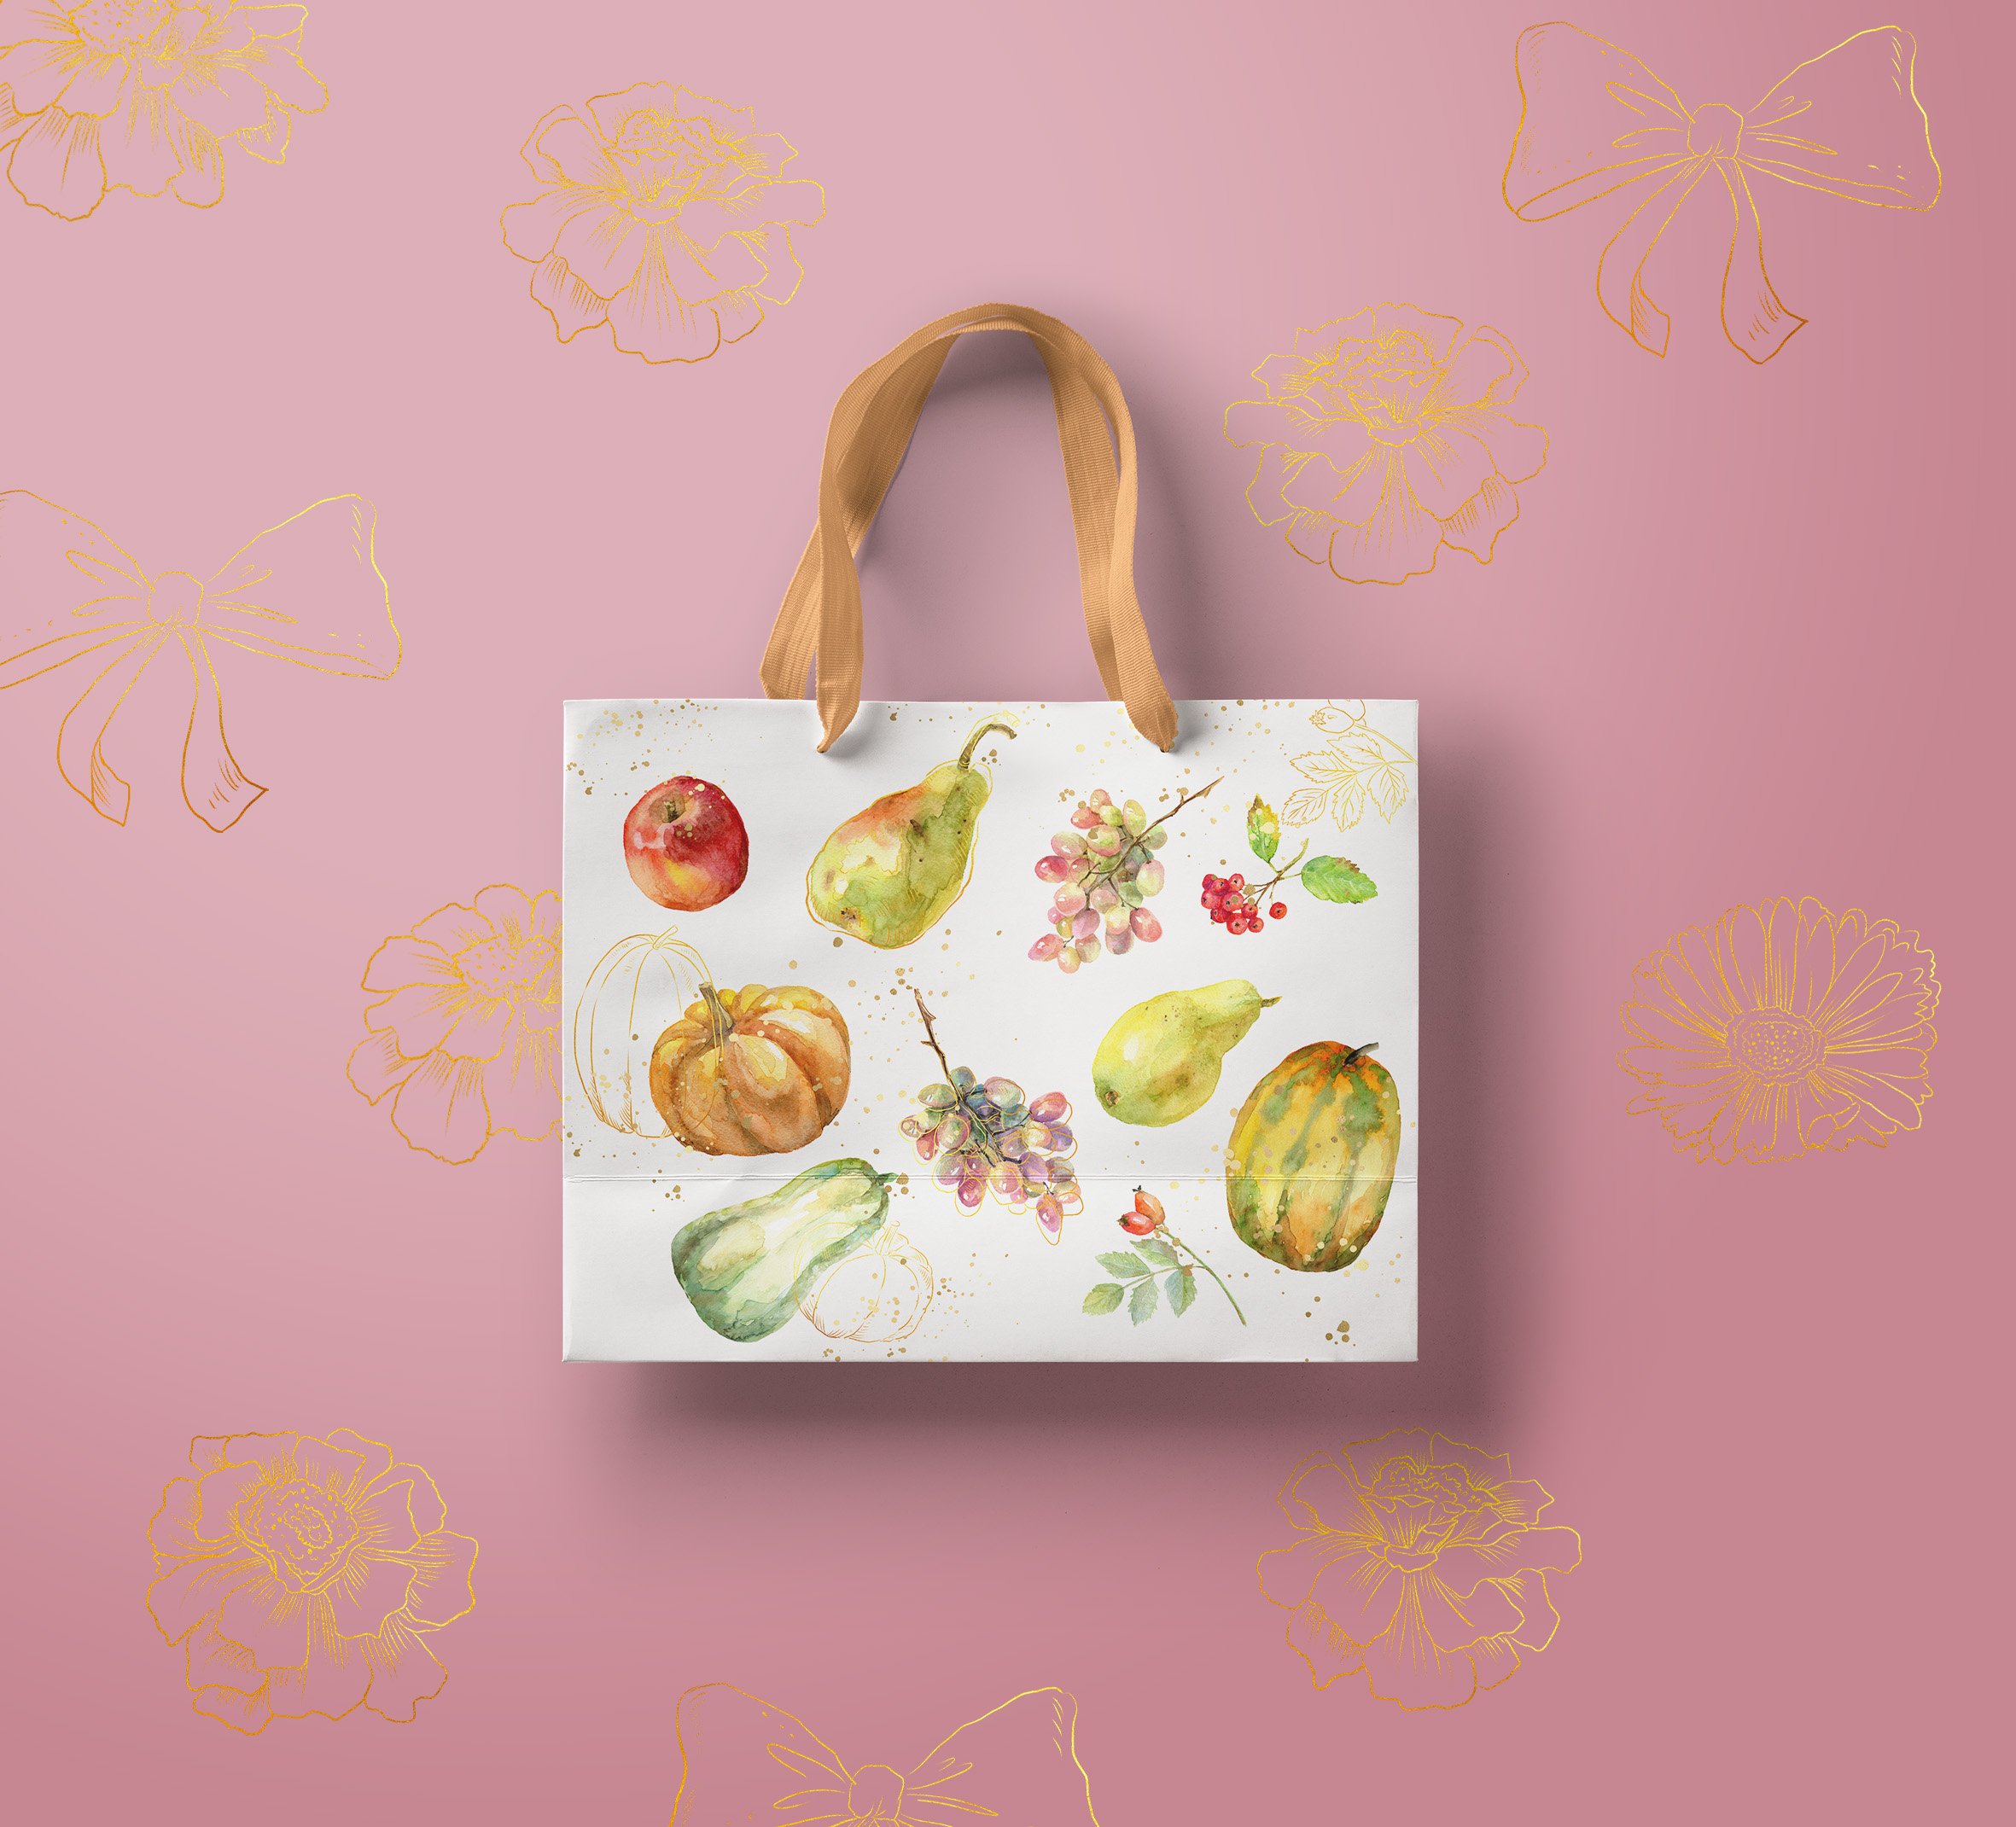 Light shopping bag with autumn illistration.